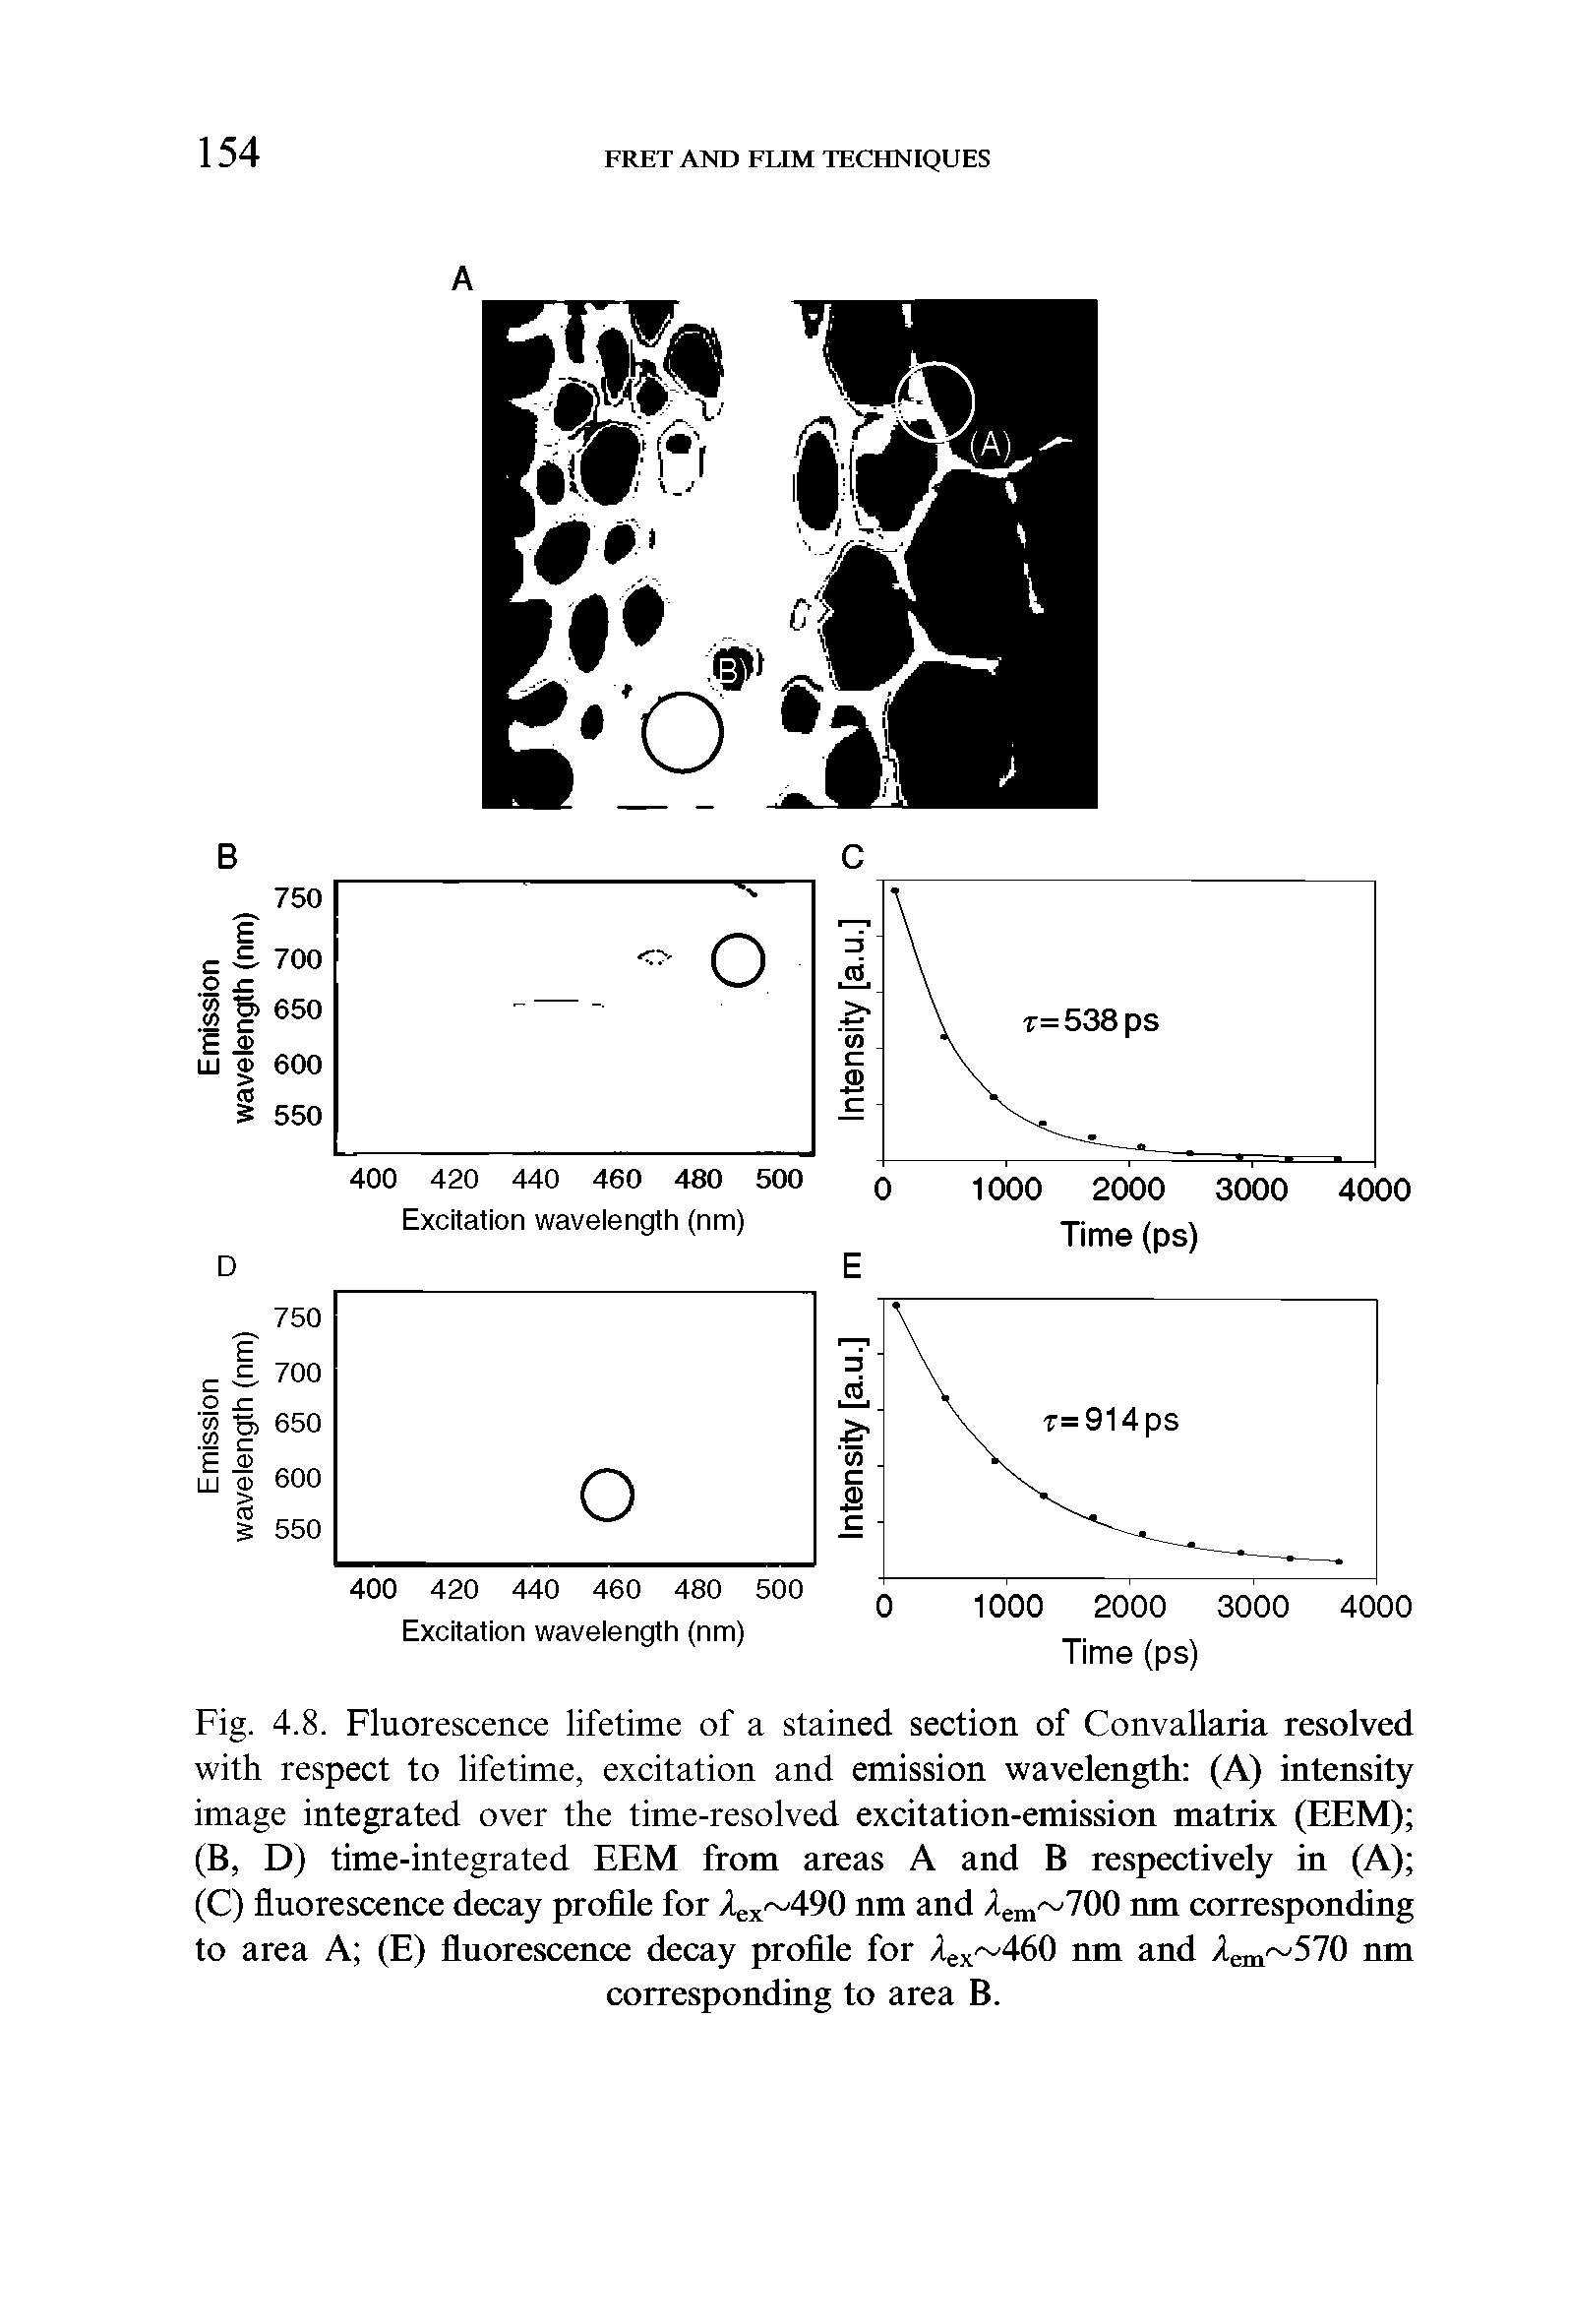 Fig. 4.8. Fluorescence lifetime of a stained section of Convallaria resolved with respect to lifetime, excitation and emission wavelength (A) intensity image integrated over the time-resolved excitation-emission matrix (EEM) (B, D) time-integrated EEM from areas A and B respectively in (A) (C) fluorescence decay profile for /ex 490 nm and Aem 700 nm corresponding to area A (E) fluorescence decay profile for Aex 460 nm and /em 570 nm corresponding to area B.